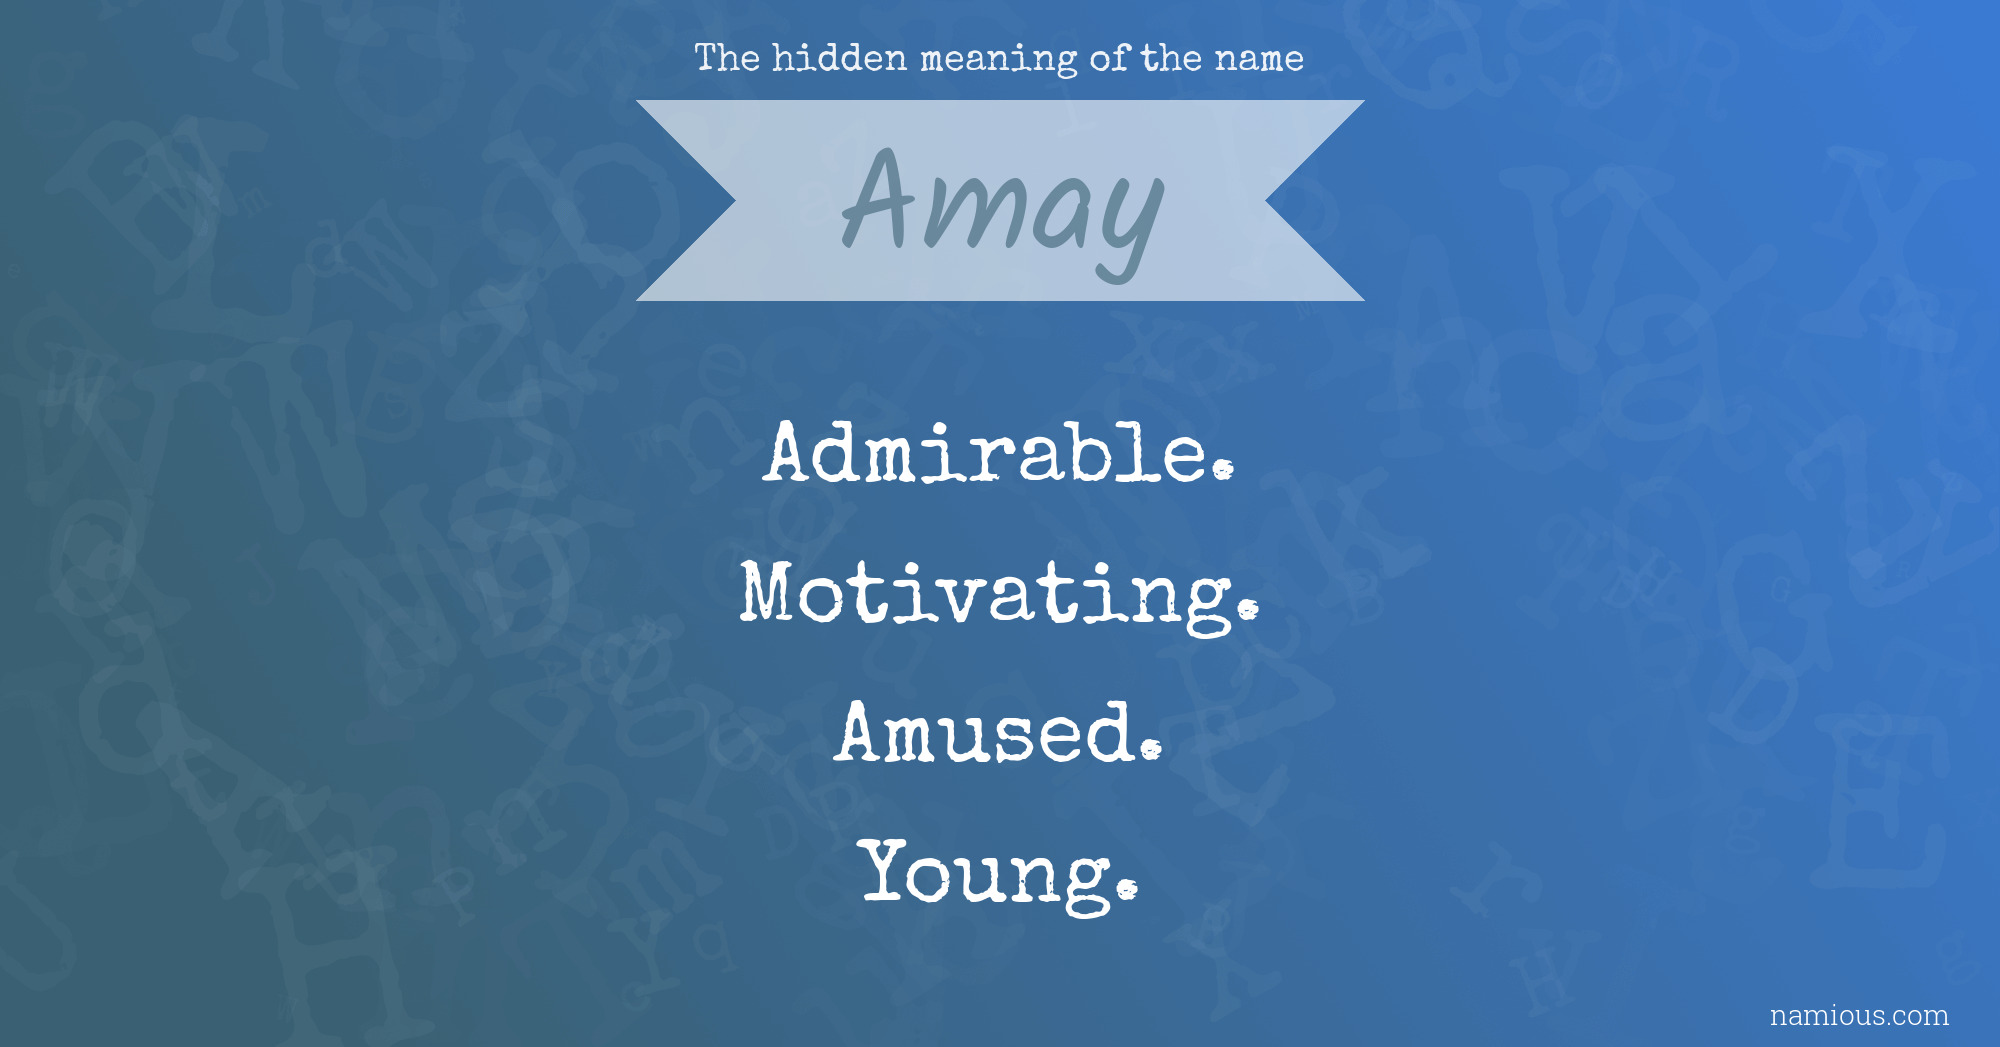 The hidden meaning of the name Amay